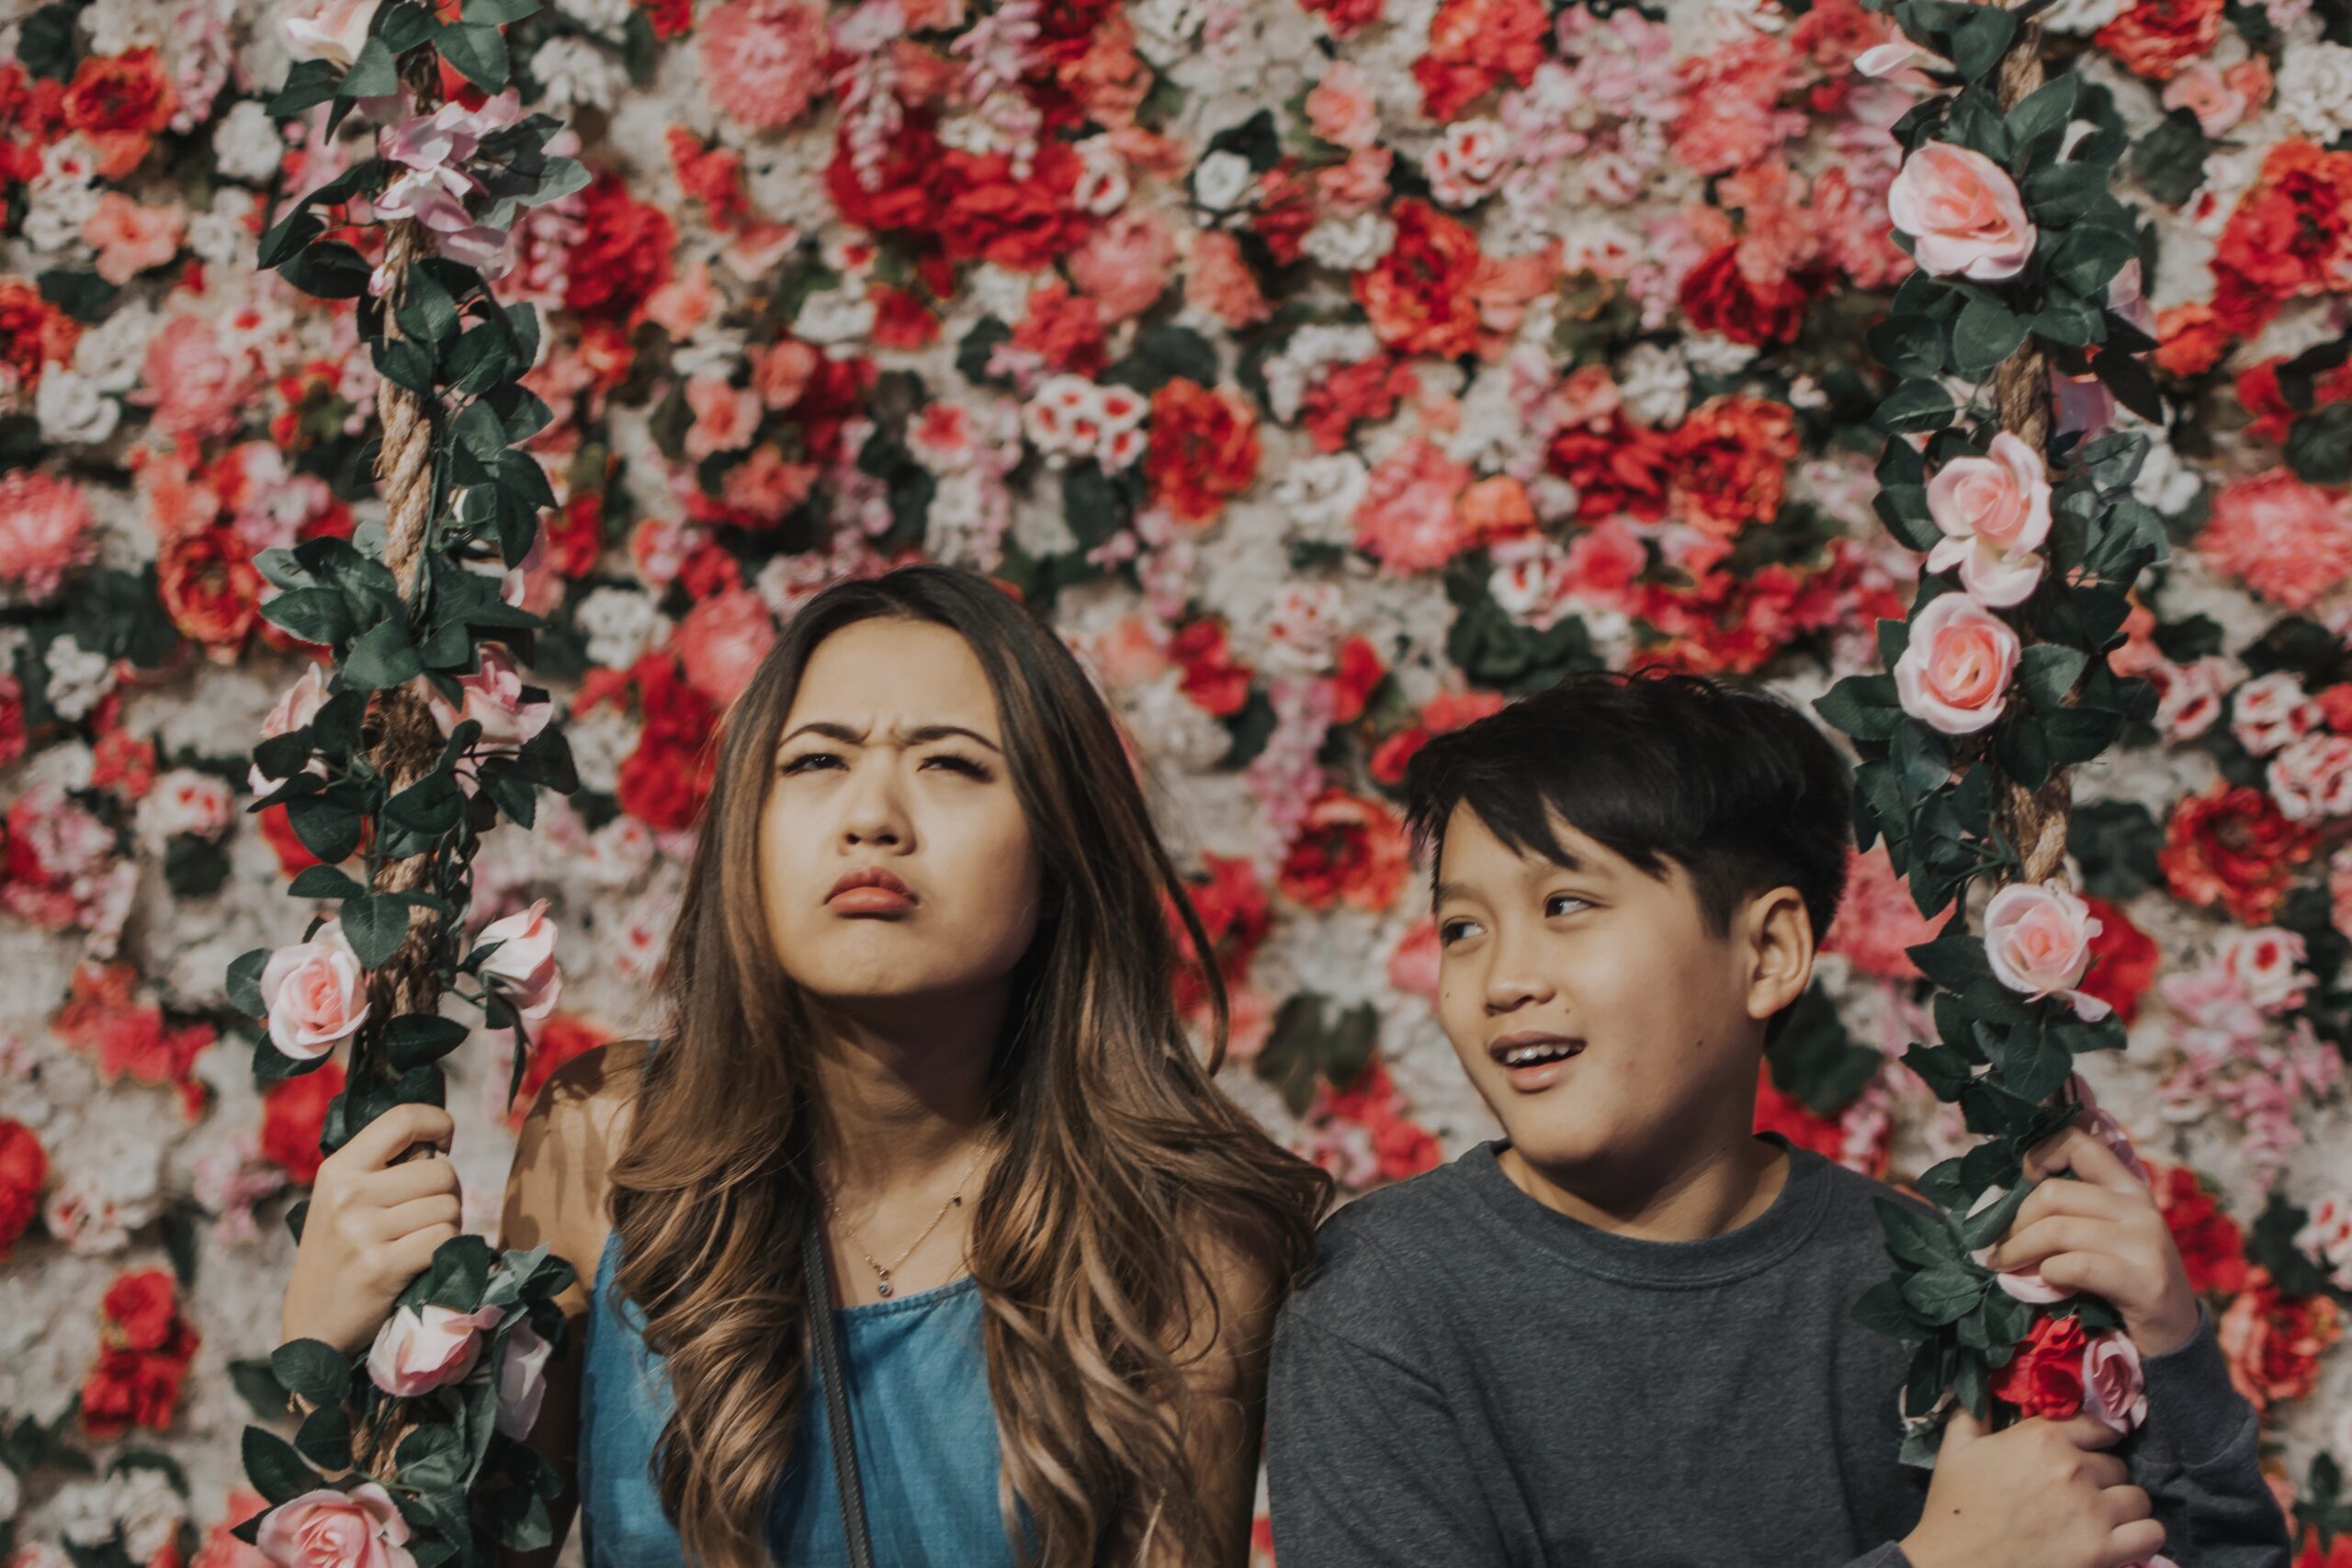 Arizona Pop-Up Photo experience with blogger, Demi Bang, in the flower room with her brother.